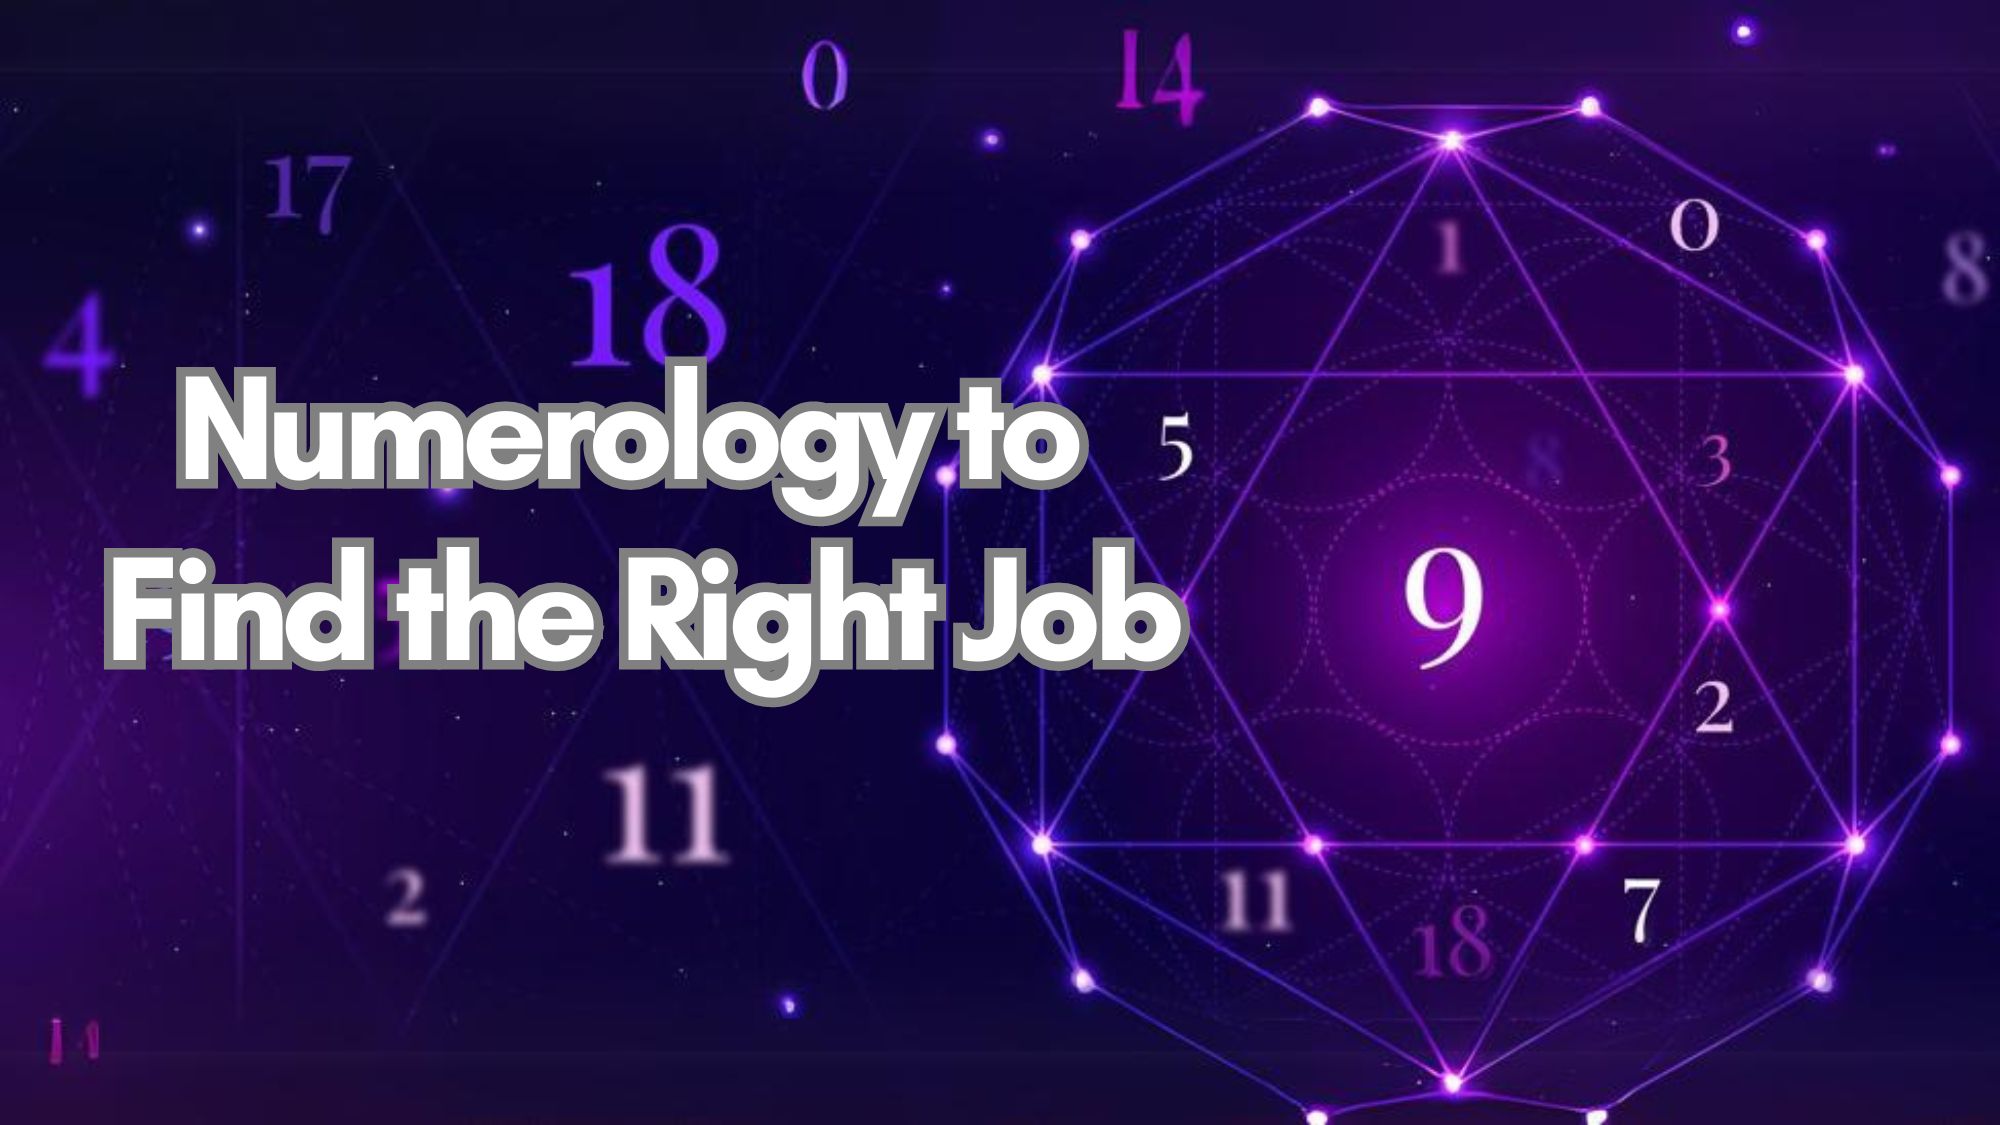 How Numerology Can Help You Find the Right Job?